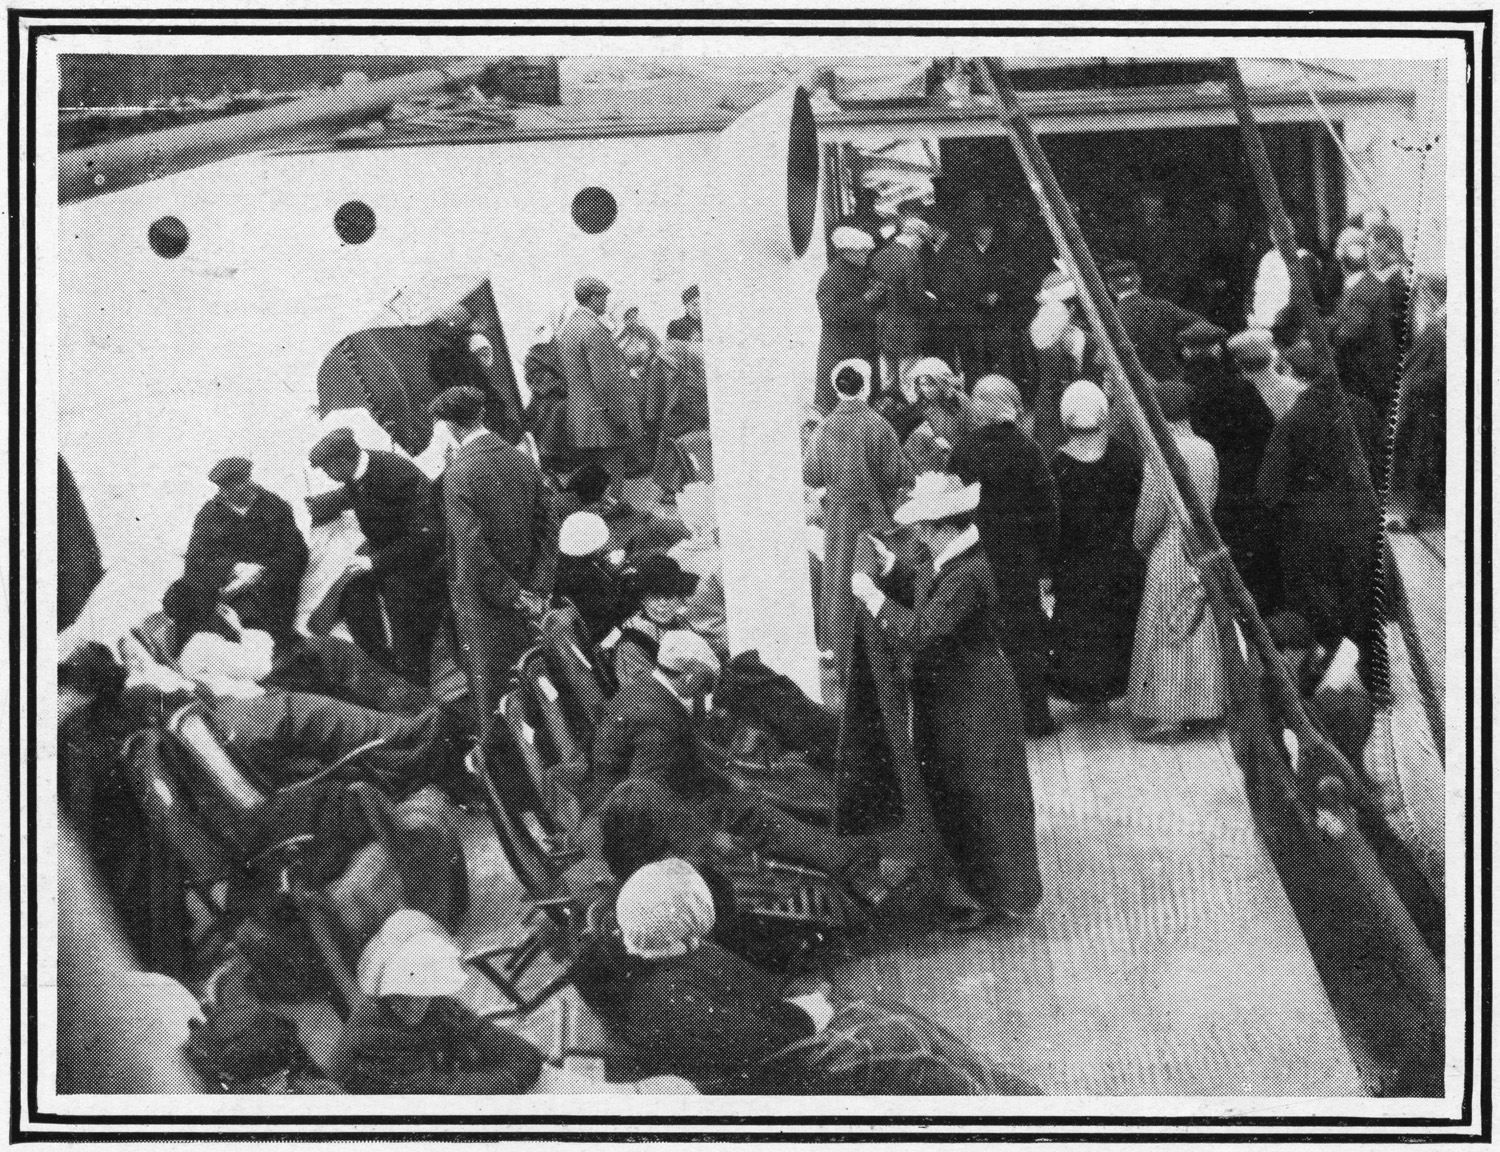 Passengers aboard the Carpathia help survivors of the Titanic after plucking more than 700 out of lifeboats, April 1912.